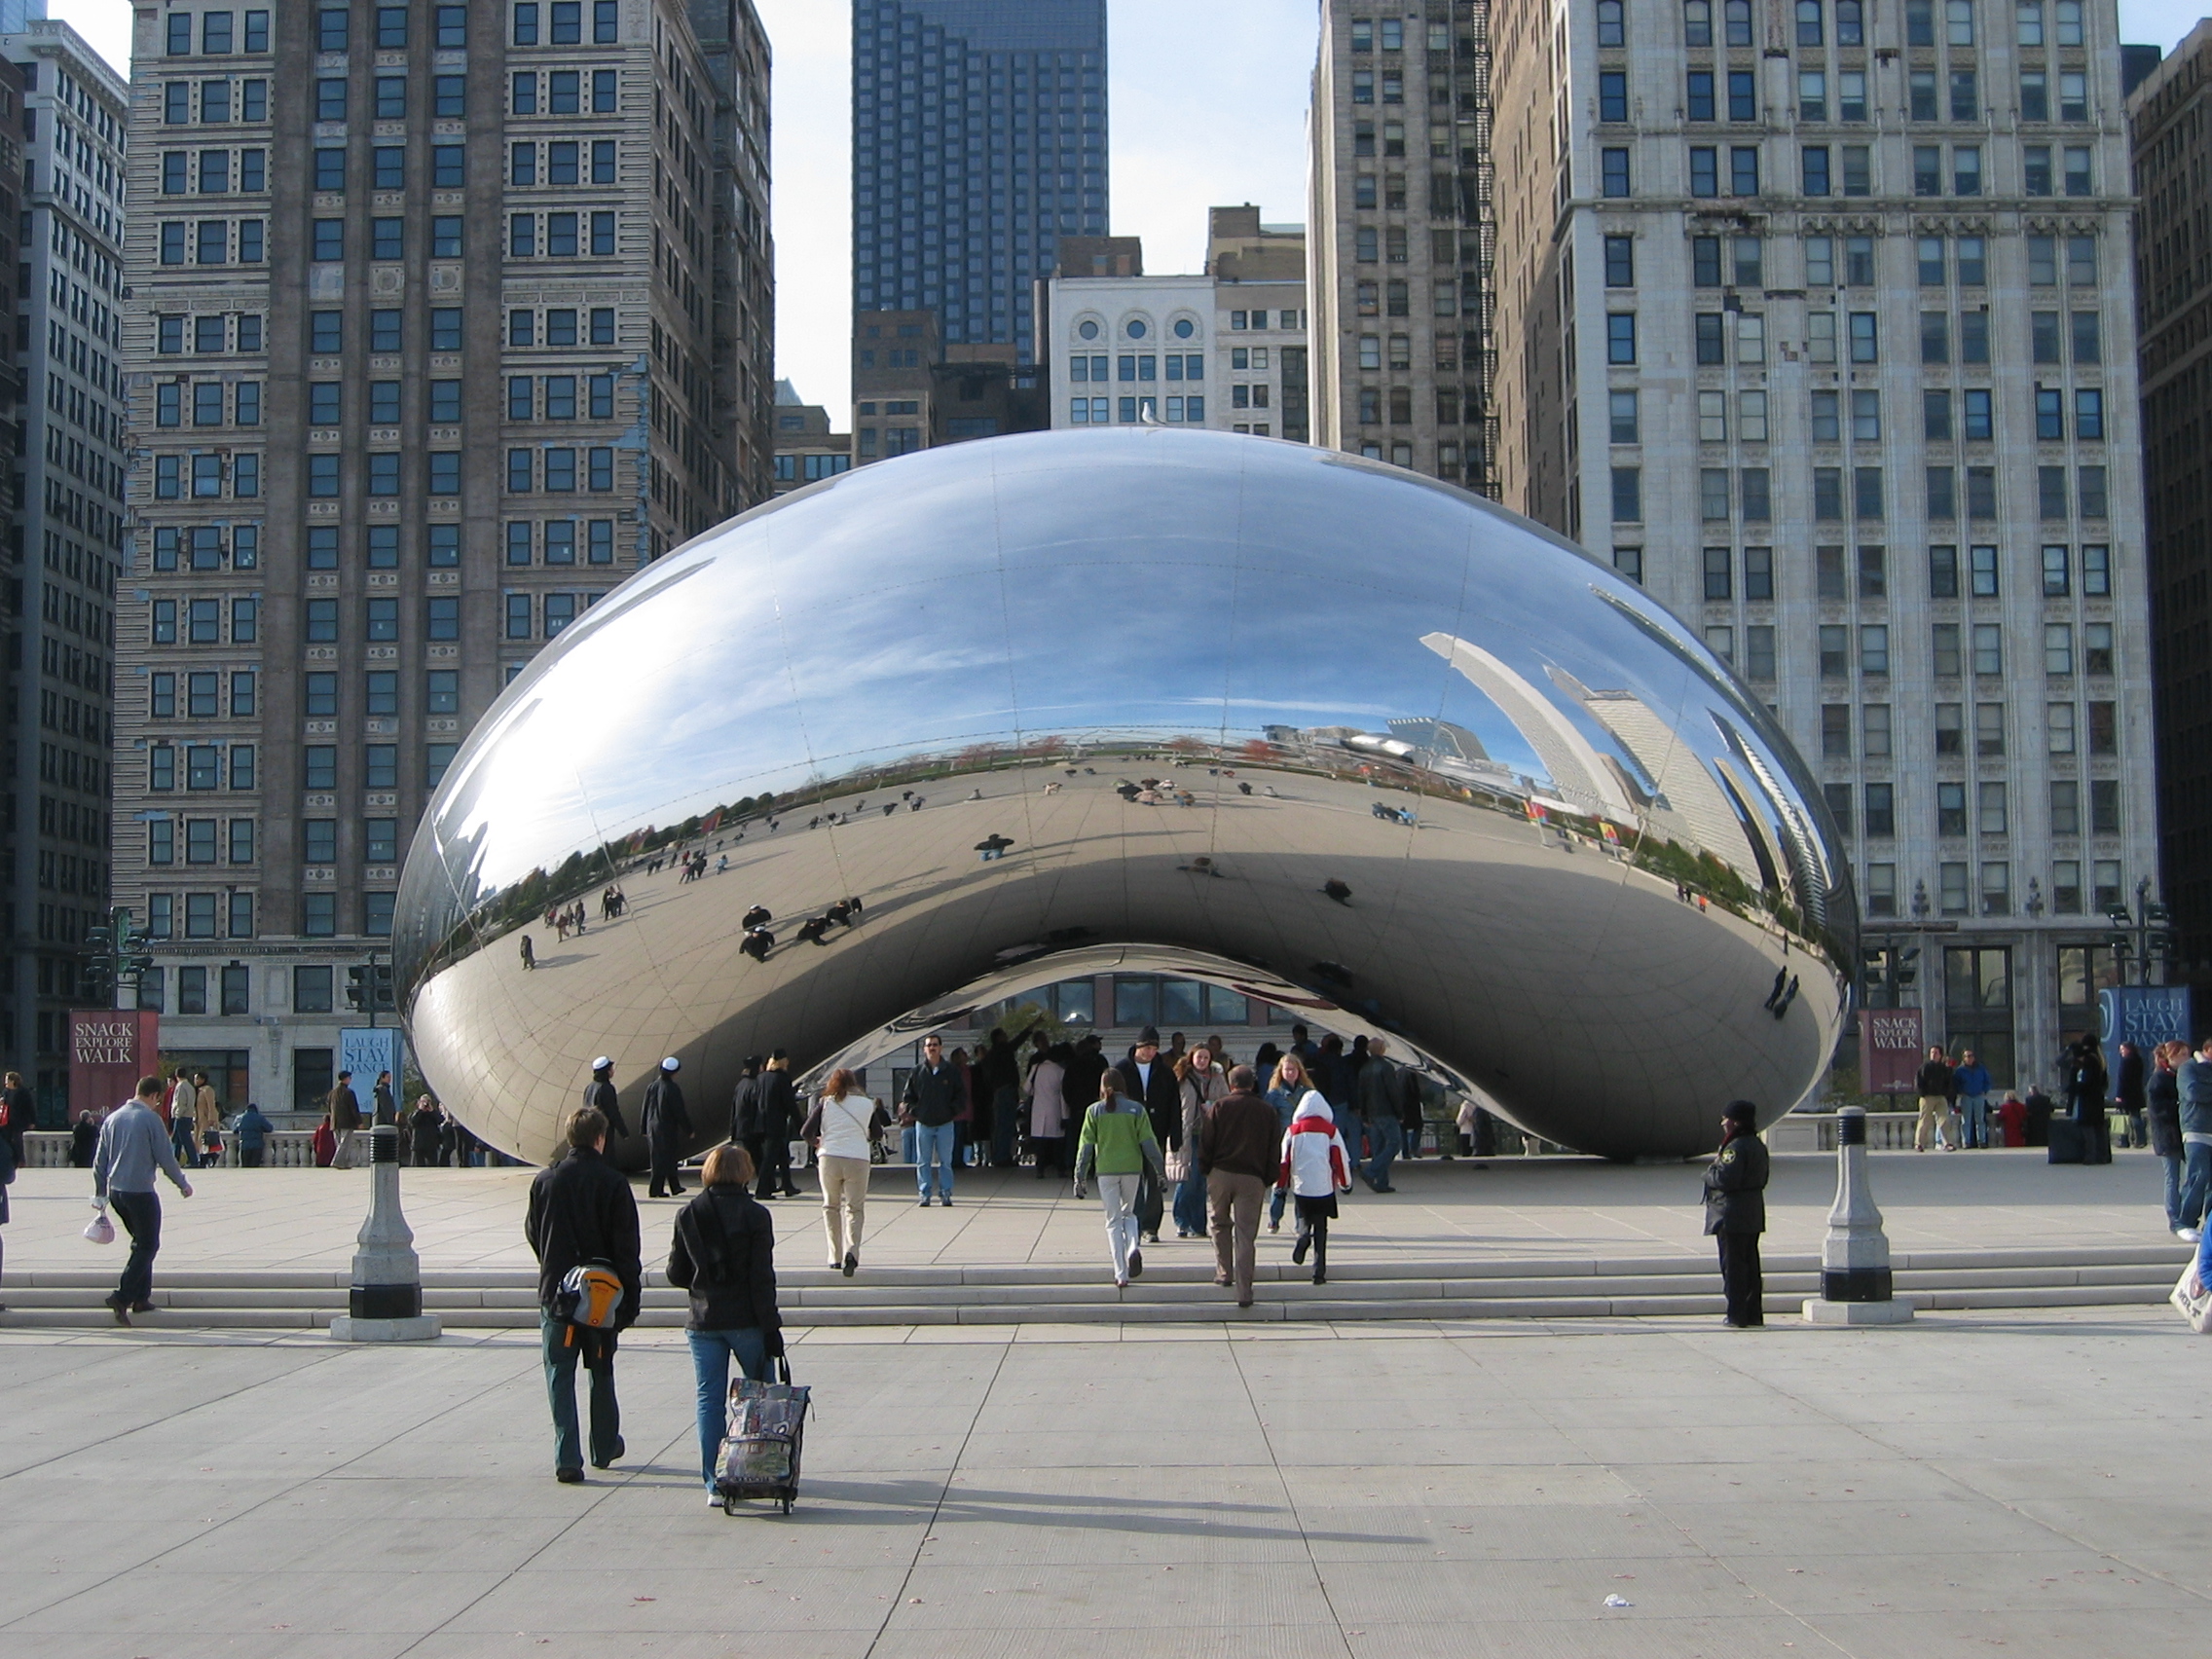 "Cloud Gate" in Chicago, USA